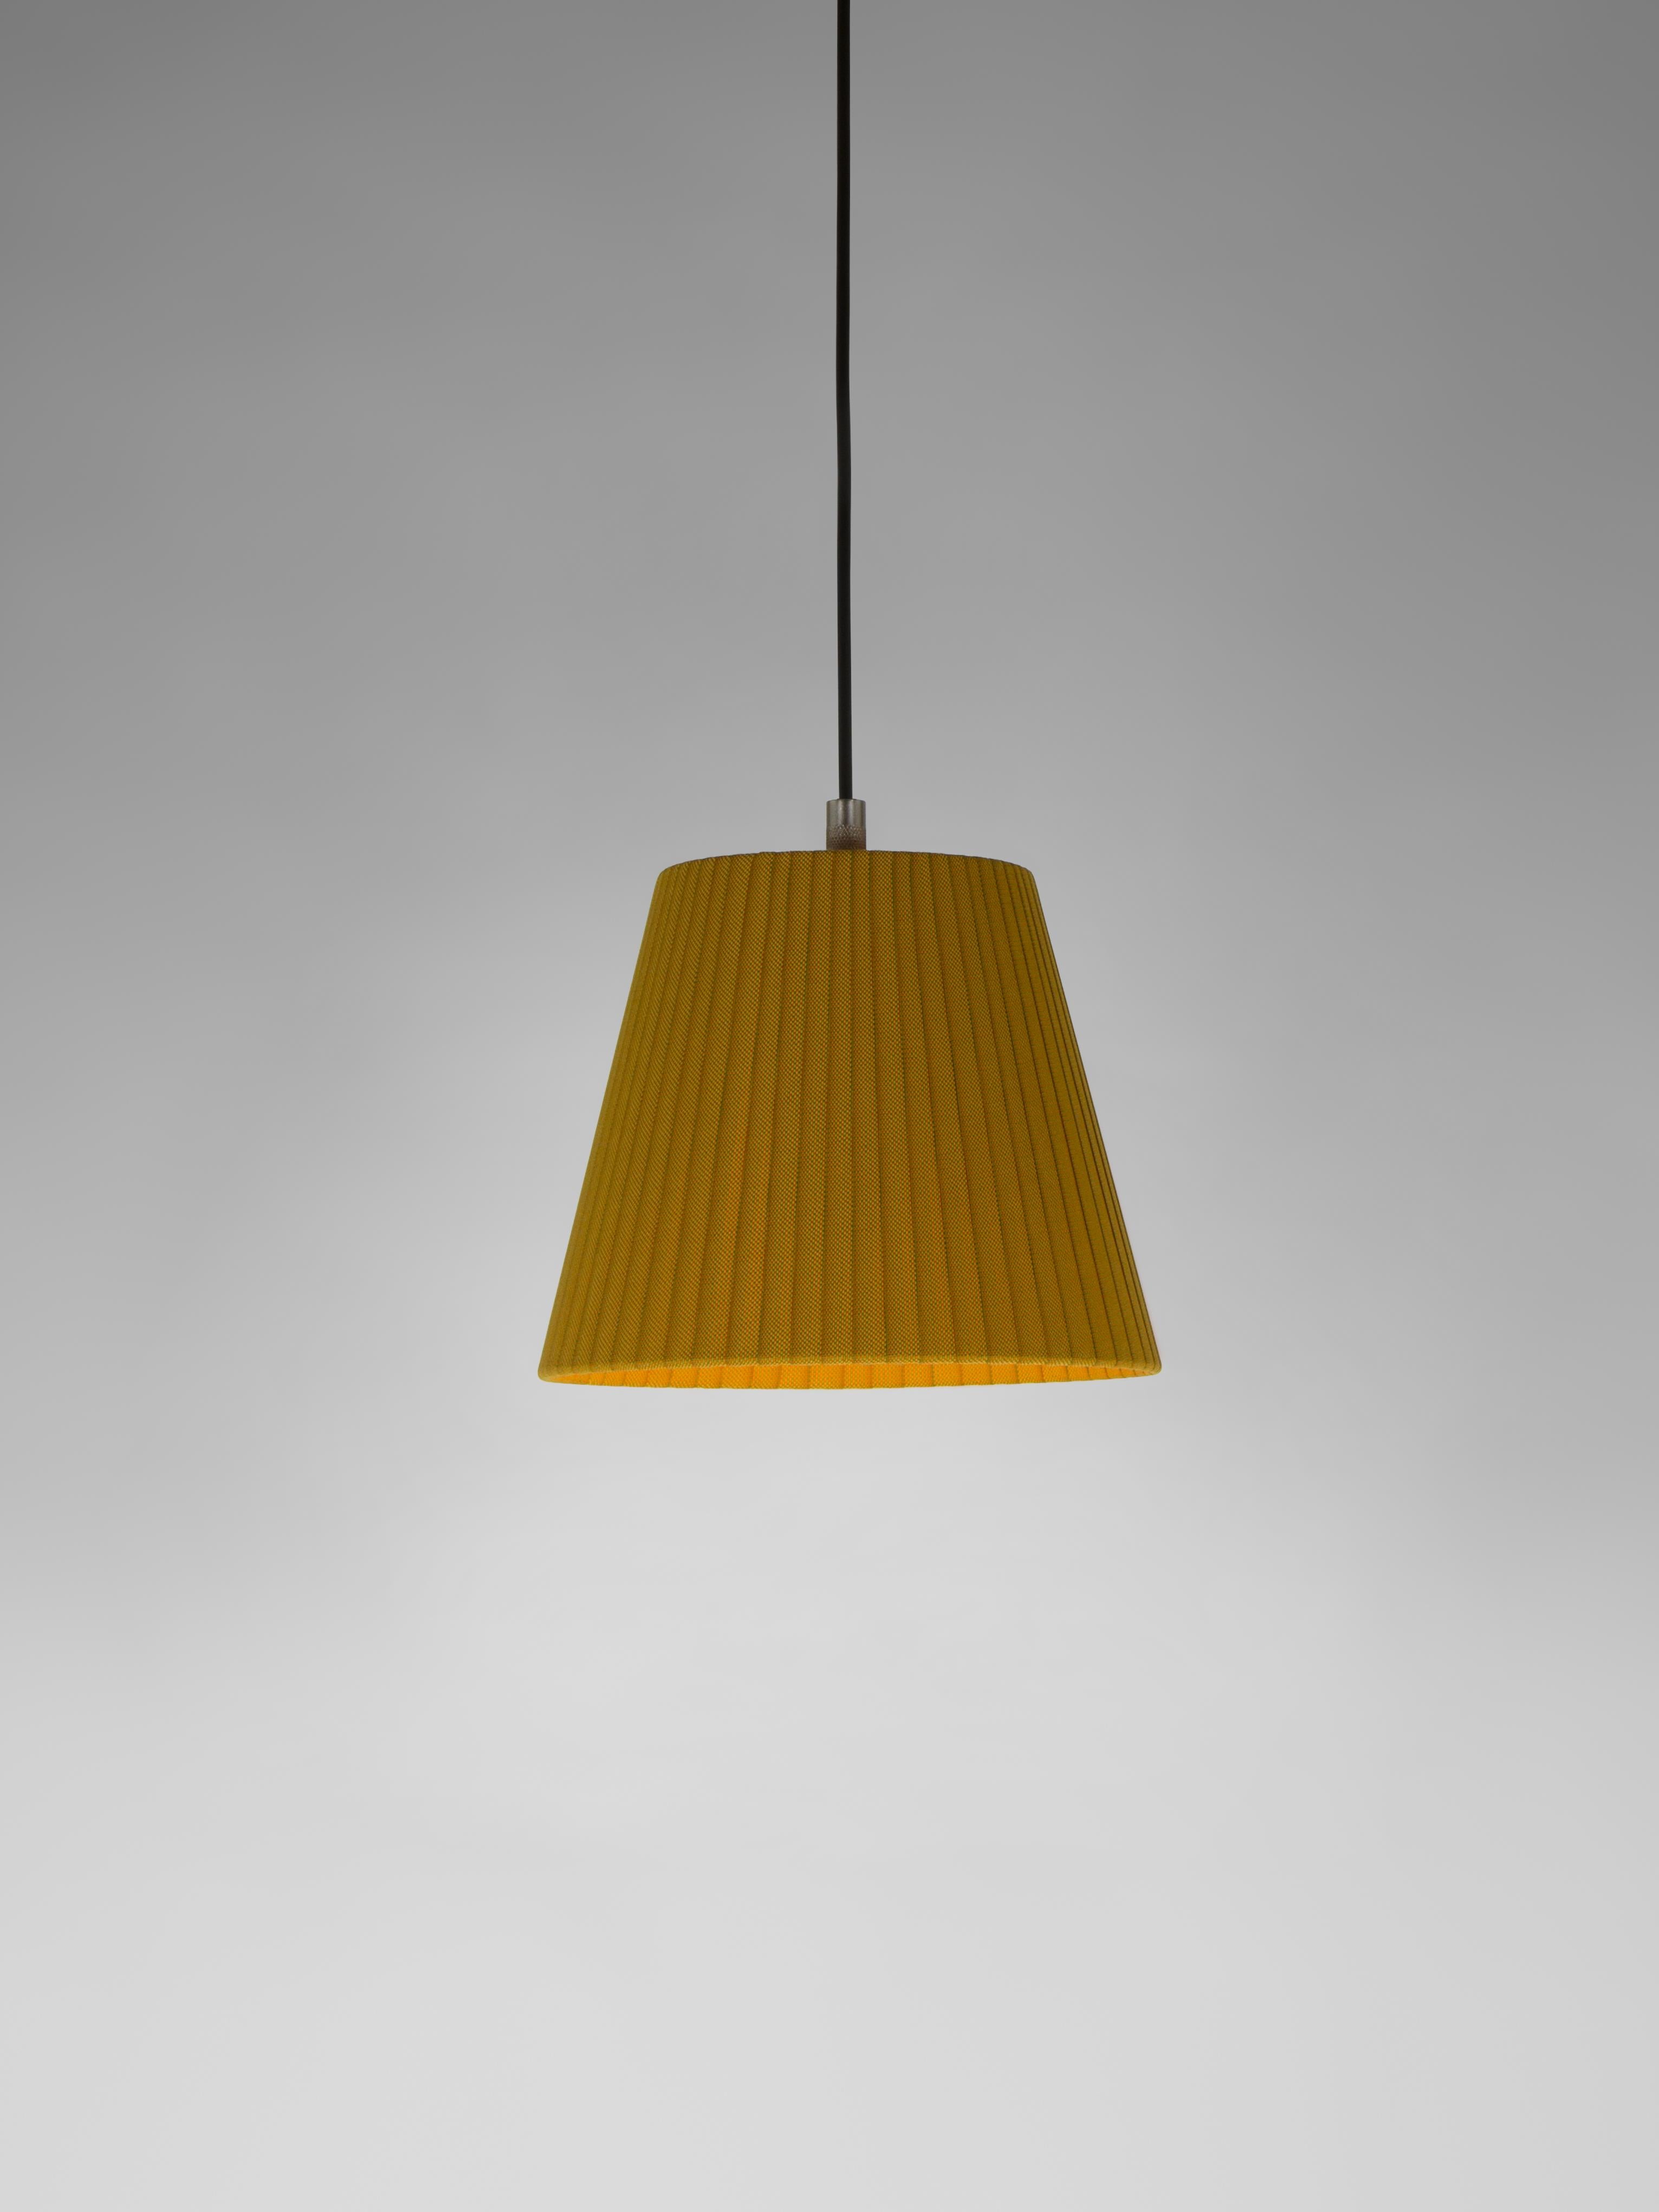 Mustard sísísí cónicas PT1 pendant lamp by Santa & Cole
Dimensions: D 20 x H 16 cm
Materials: Metal, ribbon.
Available in other colors.

The conical shape group has multiple finishes and sizes. It consists of four sizes: PT1, MT1, GT1 and GT3,